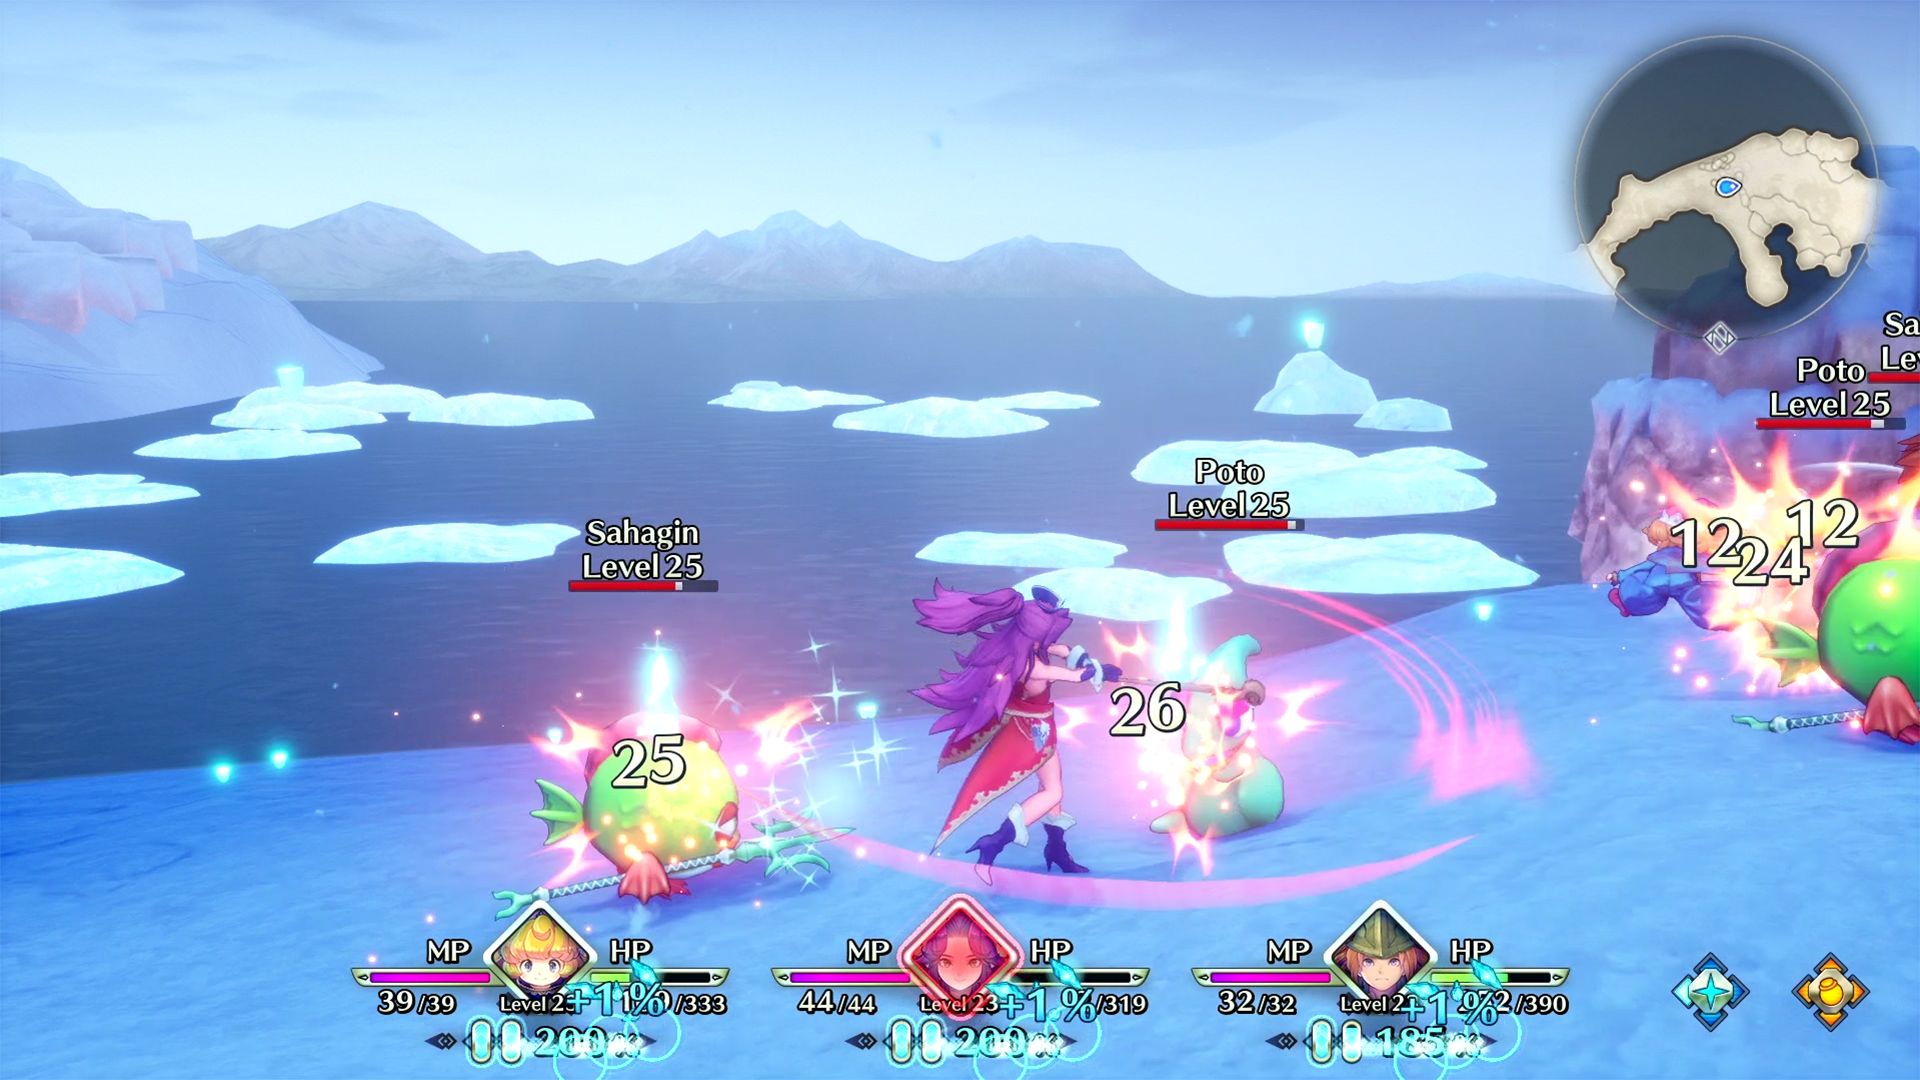 TRIALS OF MANA New Trailer by SQUARE ENIX Showcases An Enchanting Fantasy World